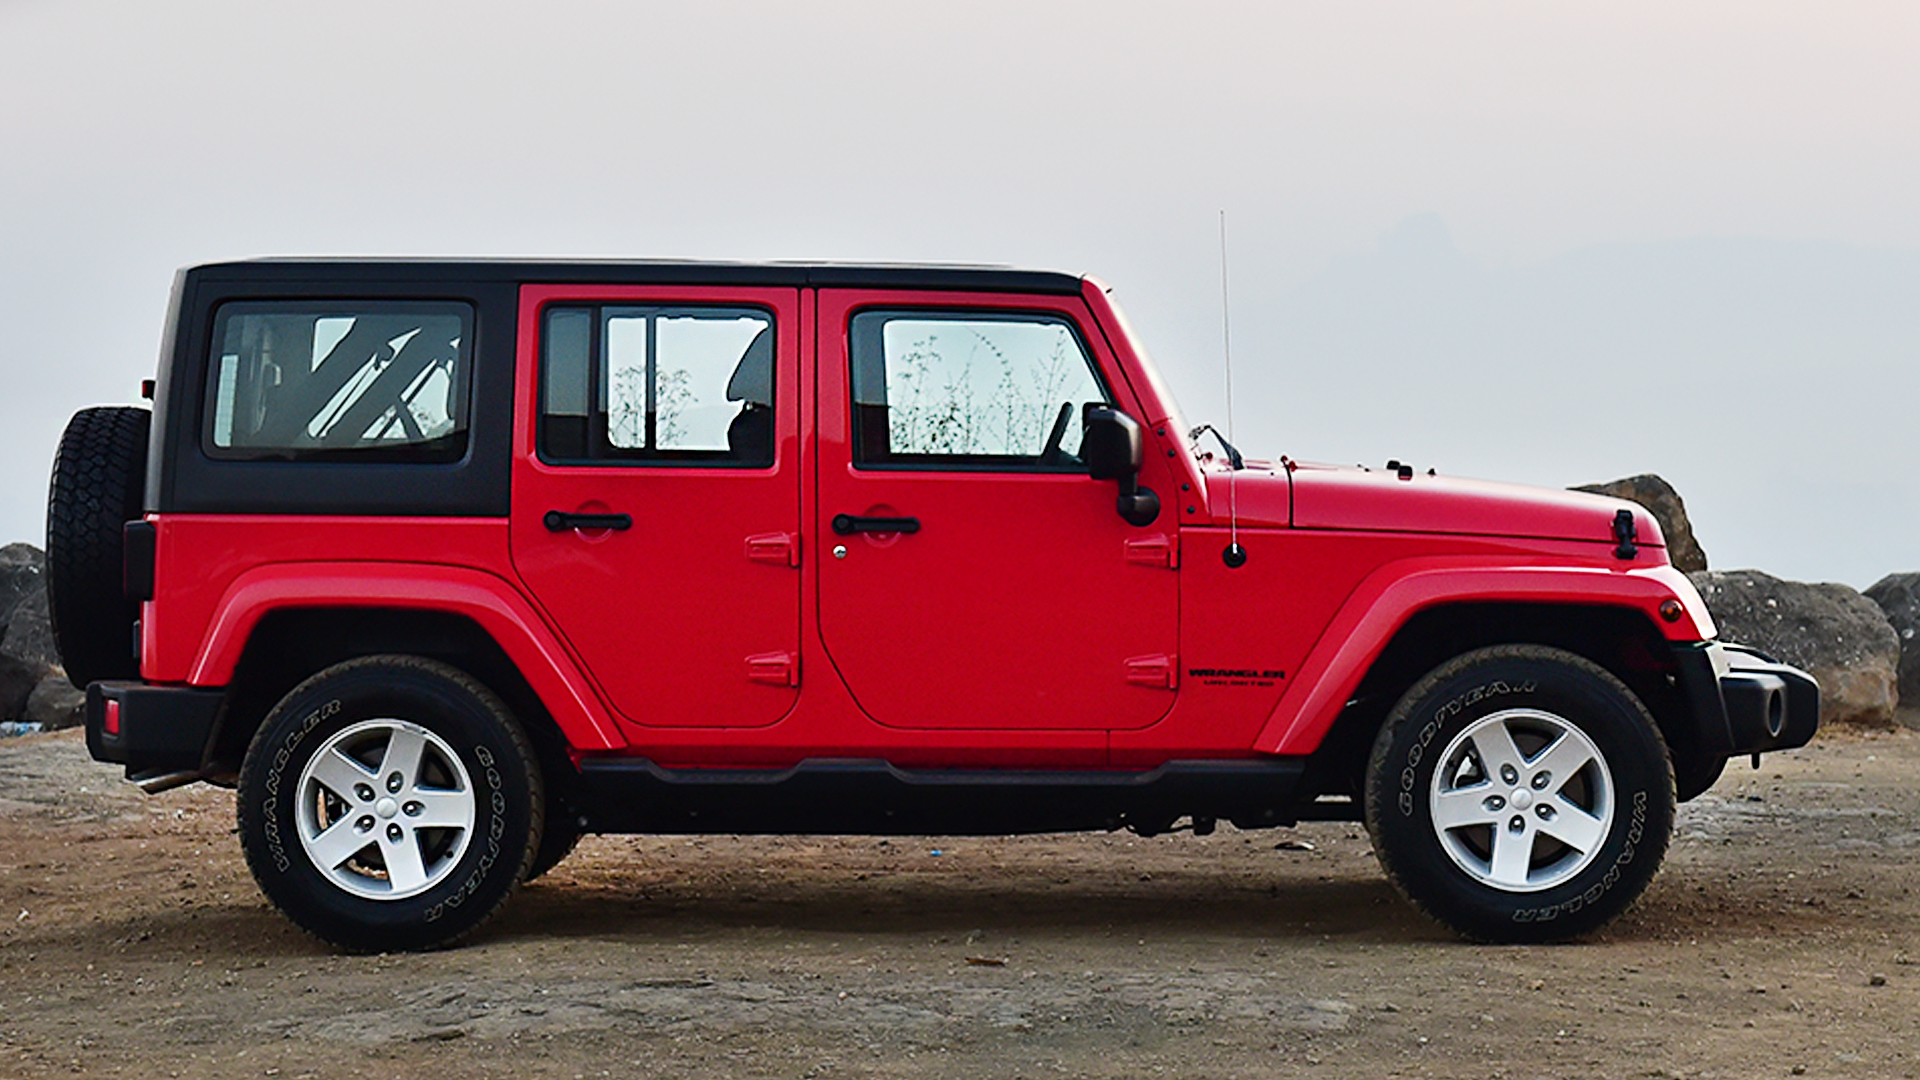 Jeep Wrangler 2016 Unlimited Exterior